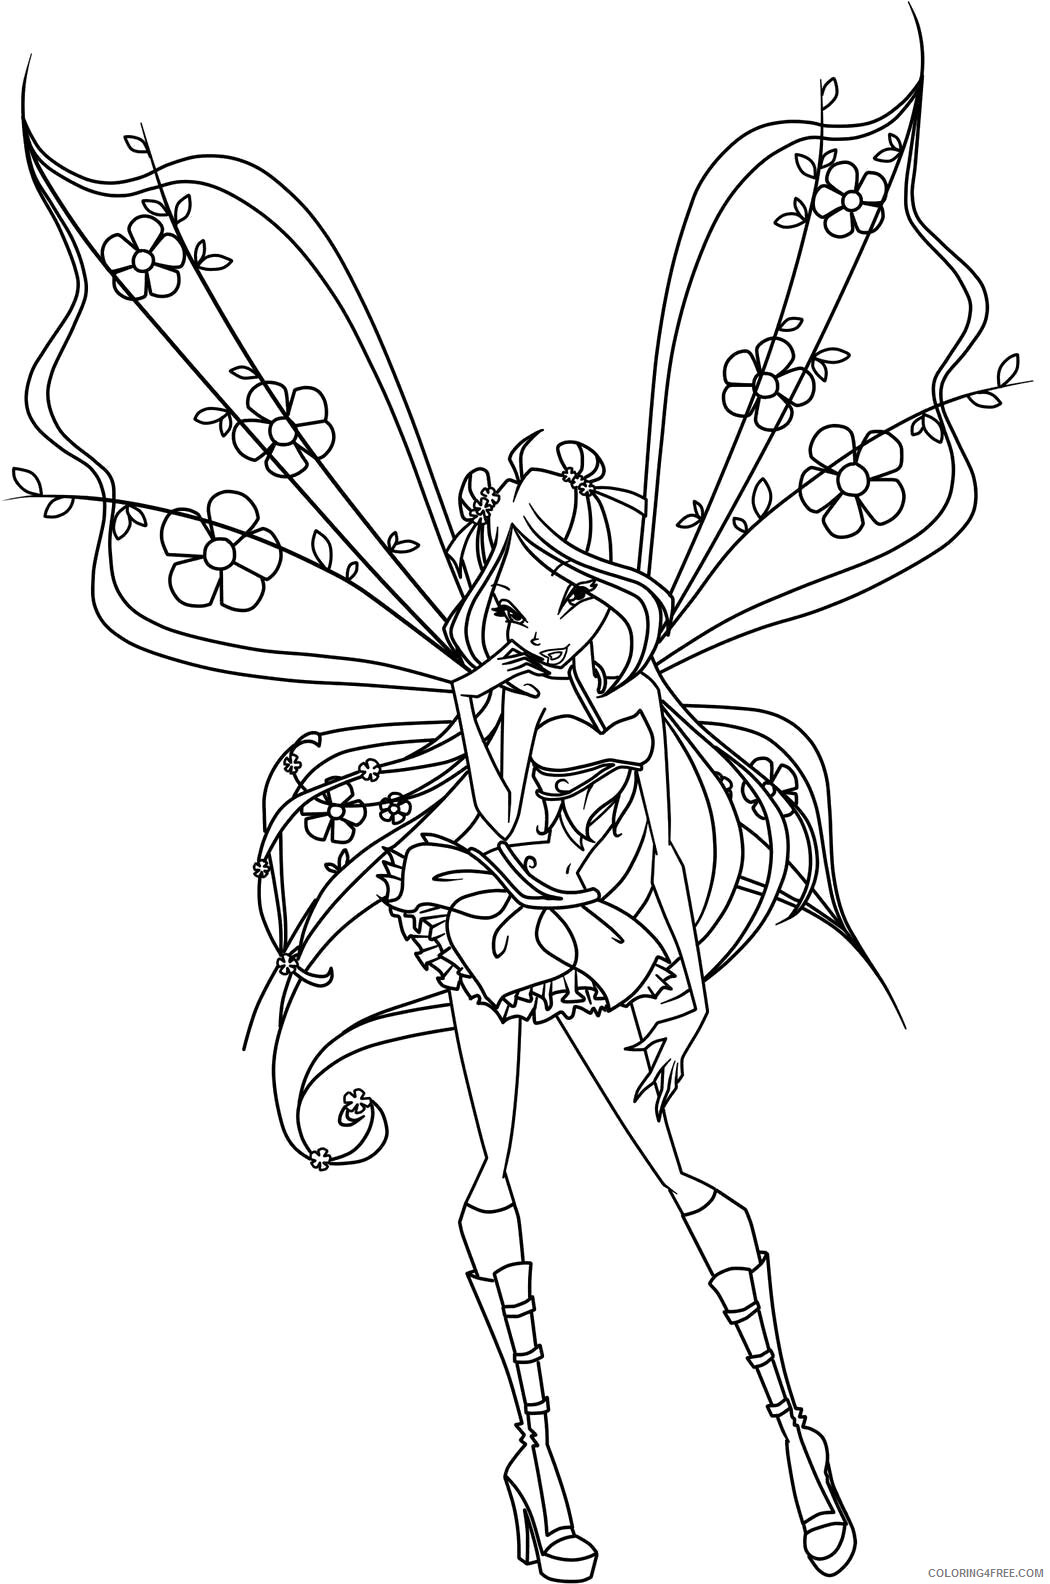 Winx Coloring Pages TV Film Winx Free Printable 2020 11435 Coloring4free